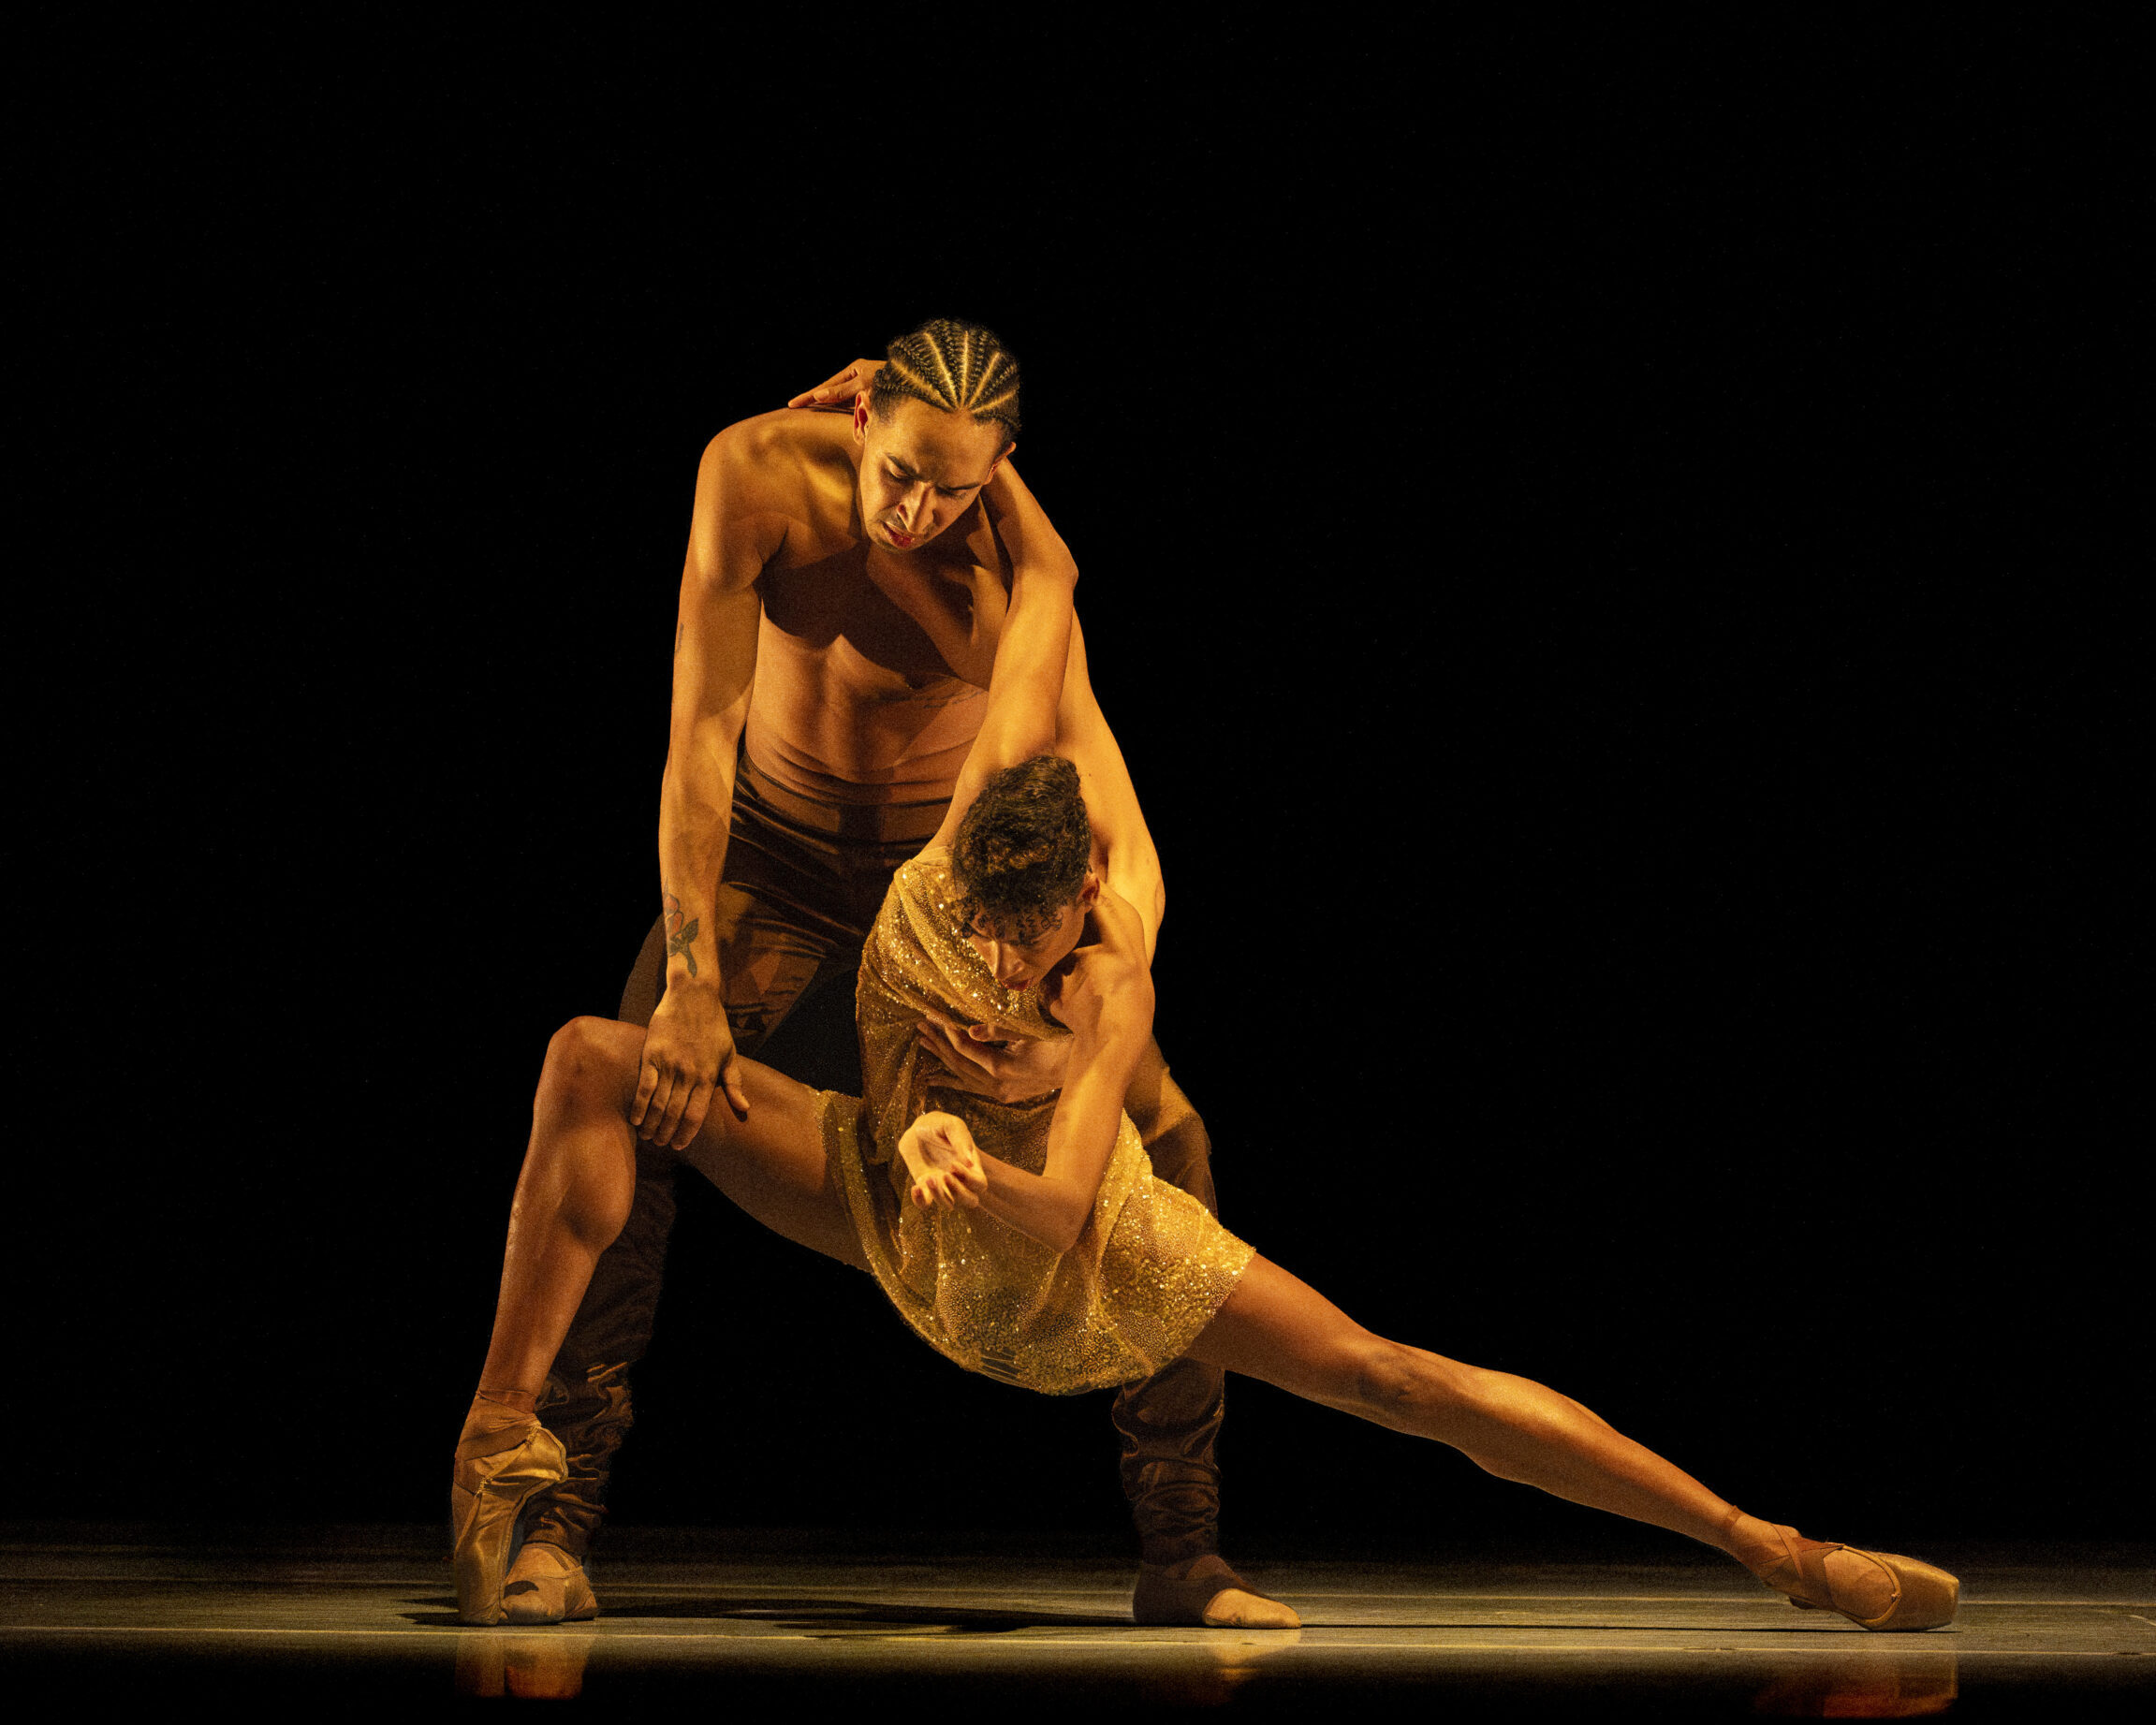 LINES Ballet company dancers Adji Cissoko and Shuaib Elhassan perform choreography by Alonzo King on stage; Adji is en pointe